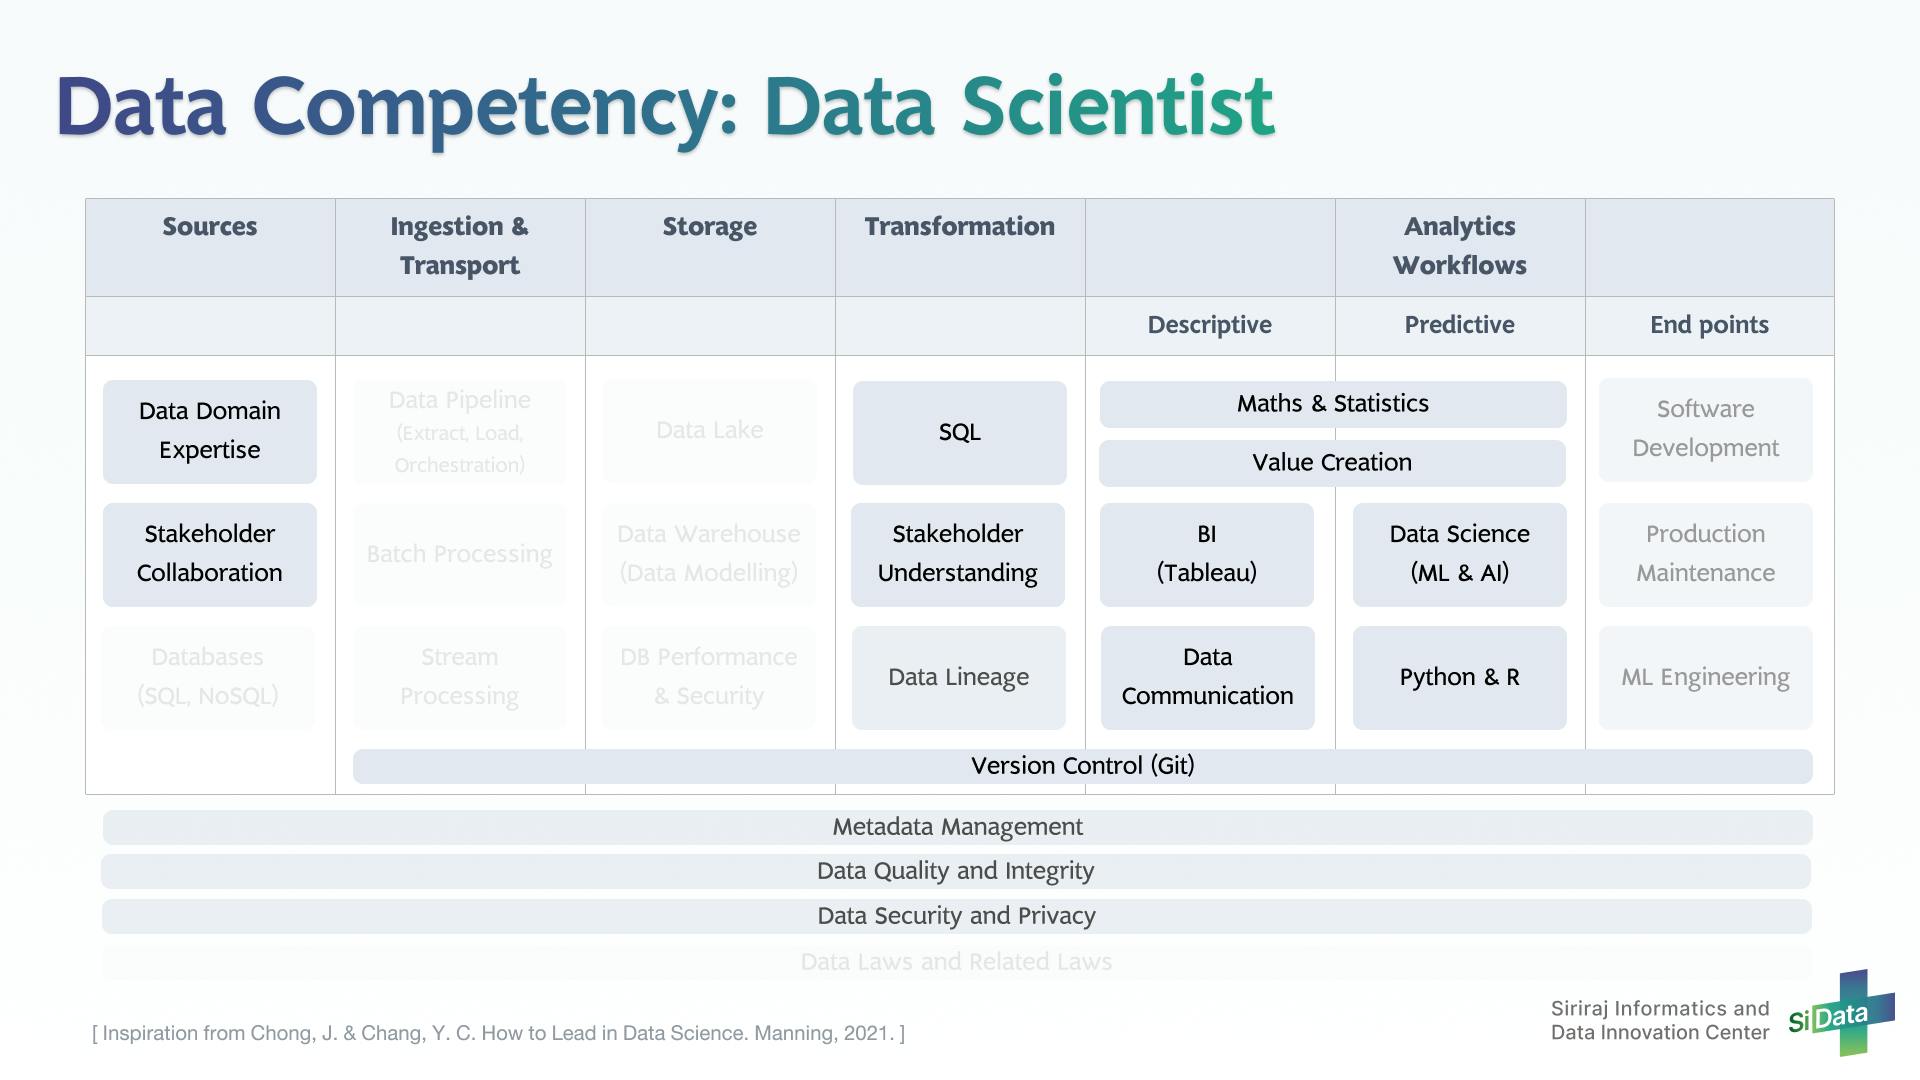 Data Competency_5 Data Scientist_20220425.png